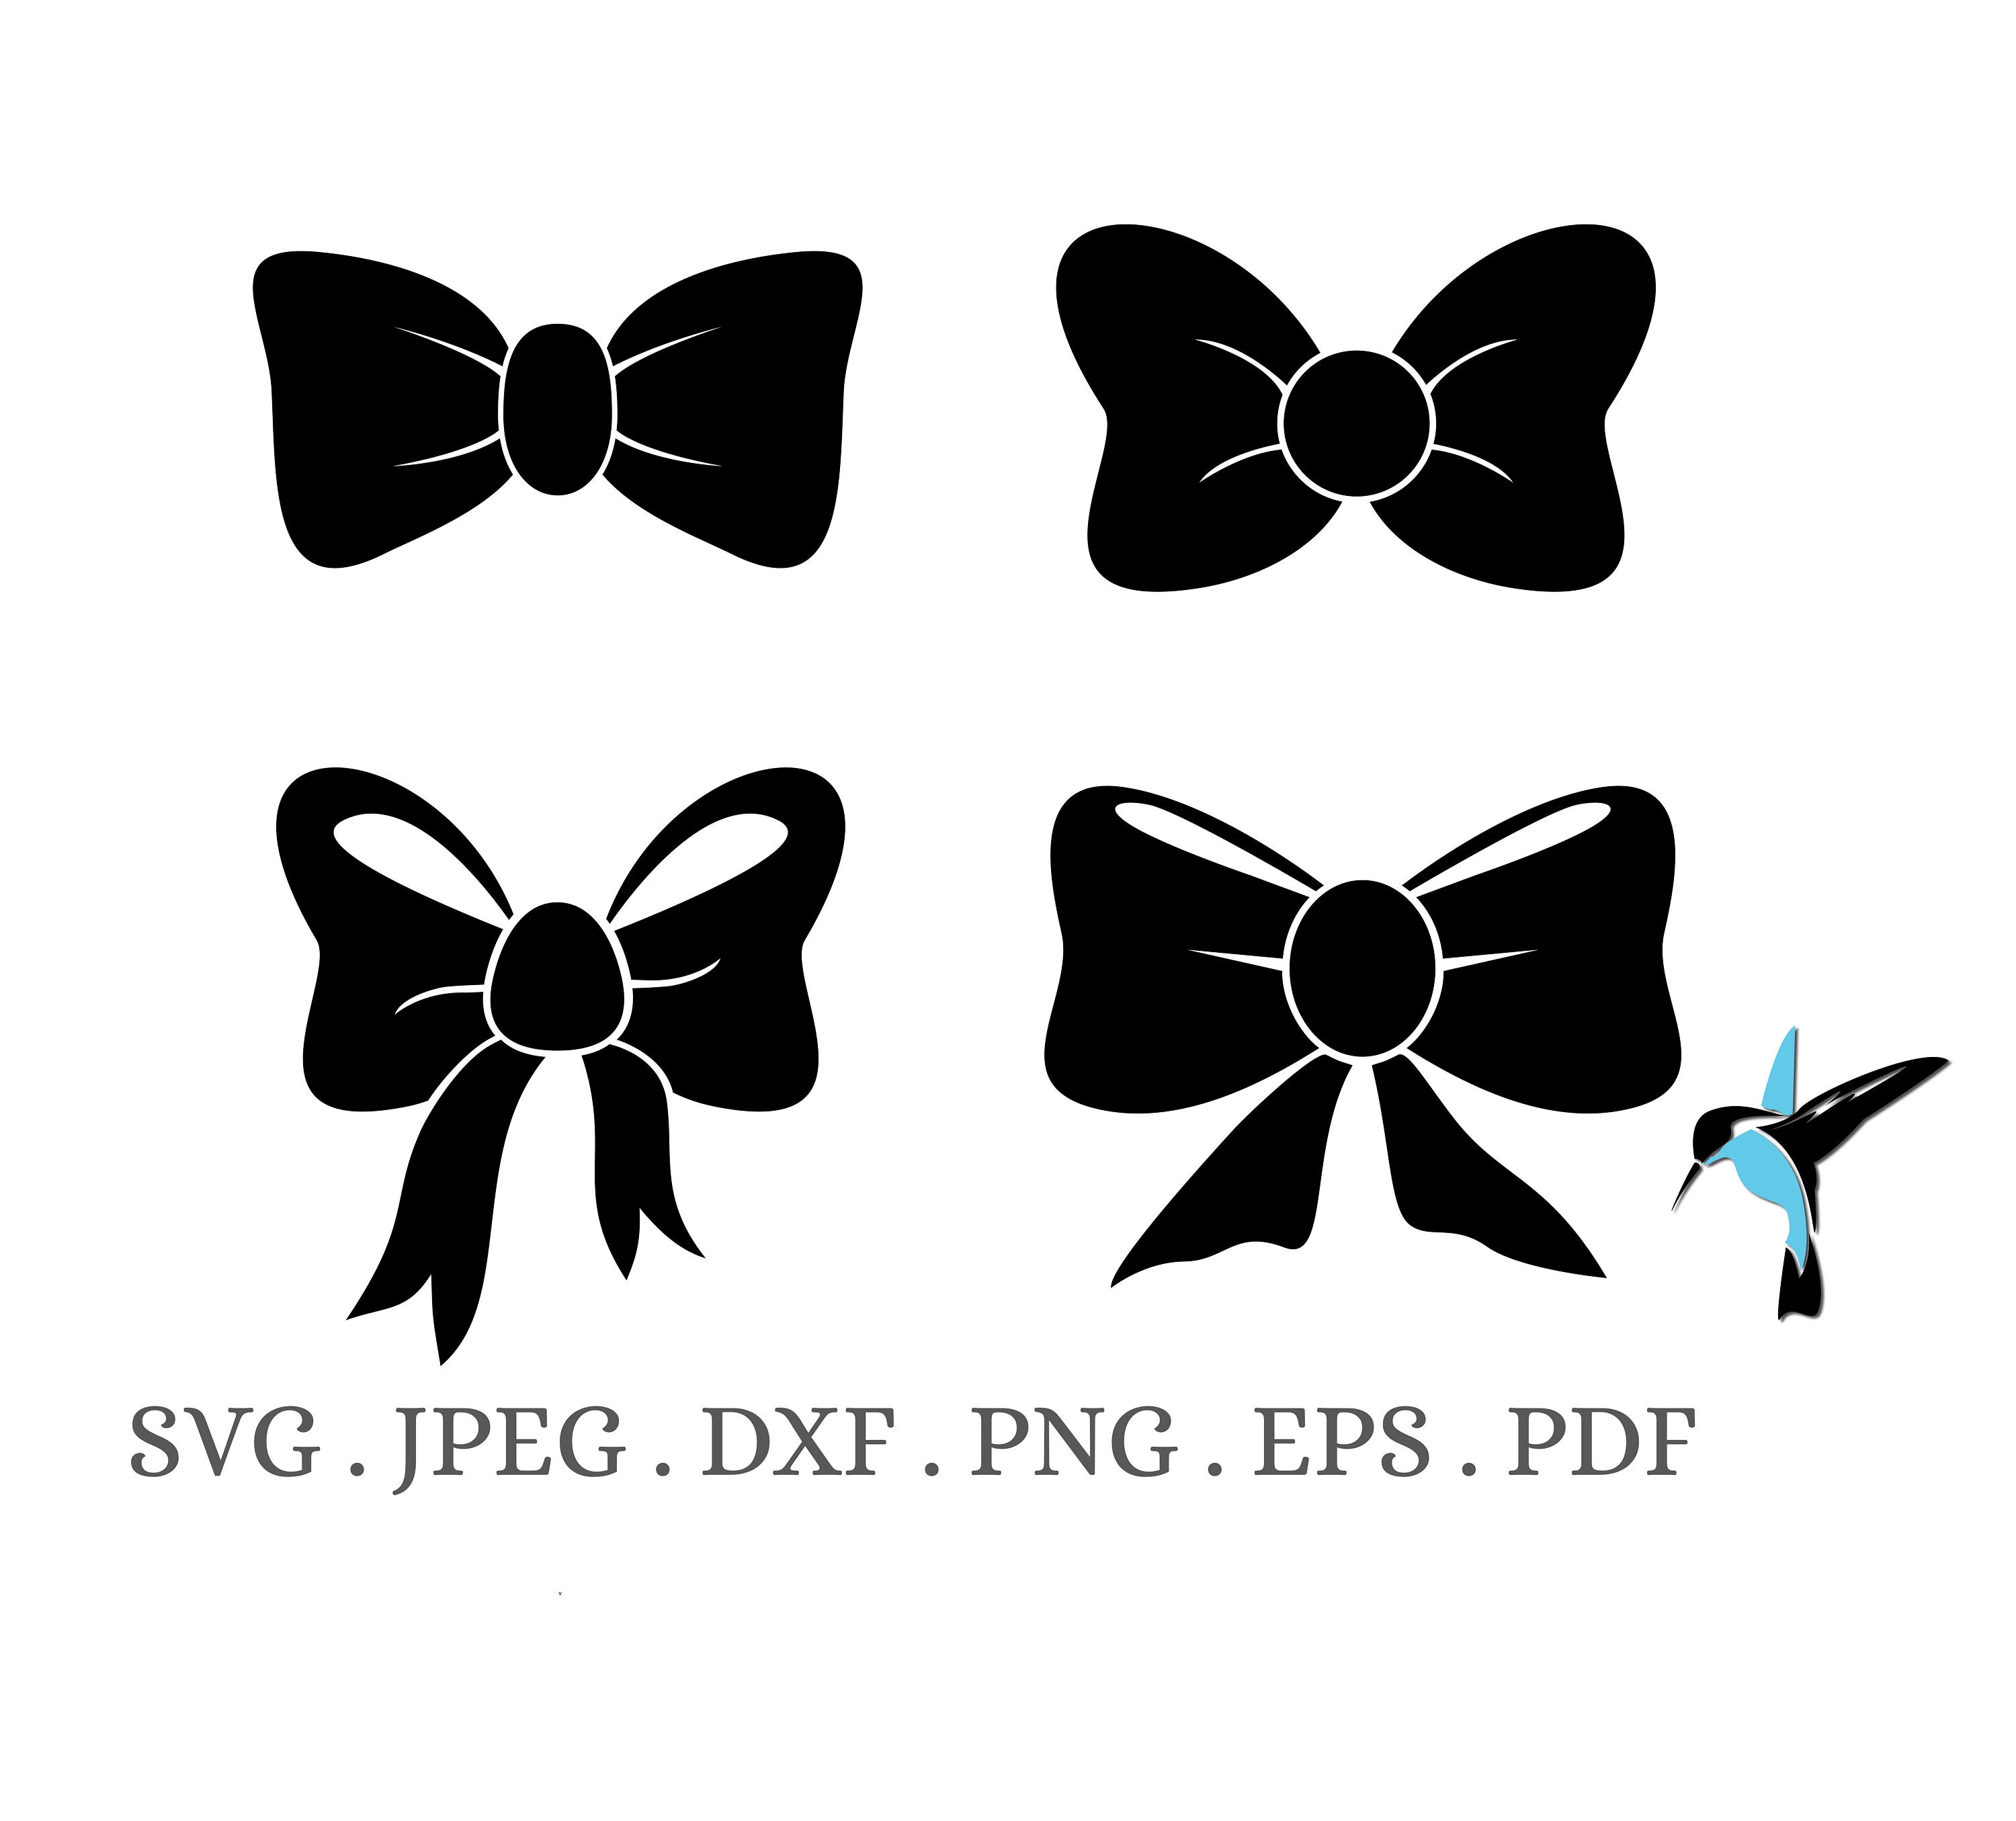 Bow SVG File , Bow Vector, Bow Clipart, Bow Svg Bundle, Bow Tie Svg